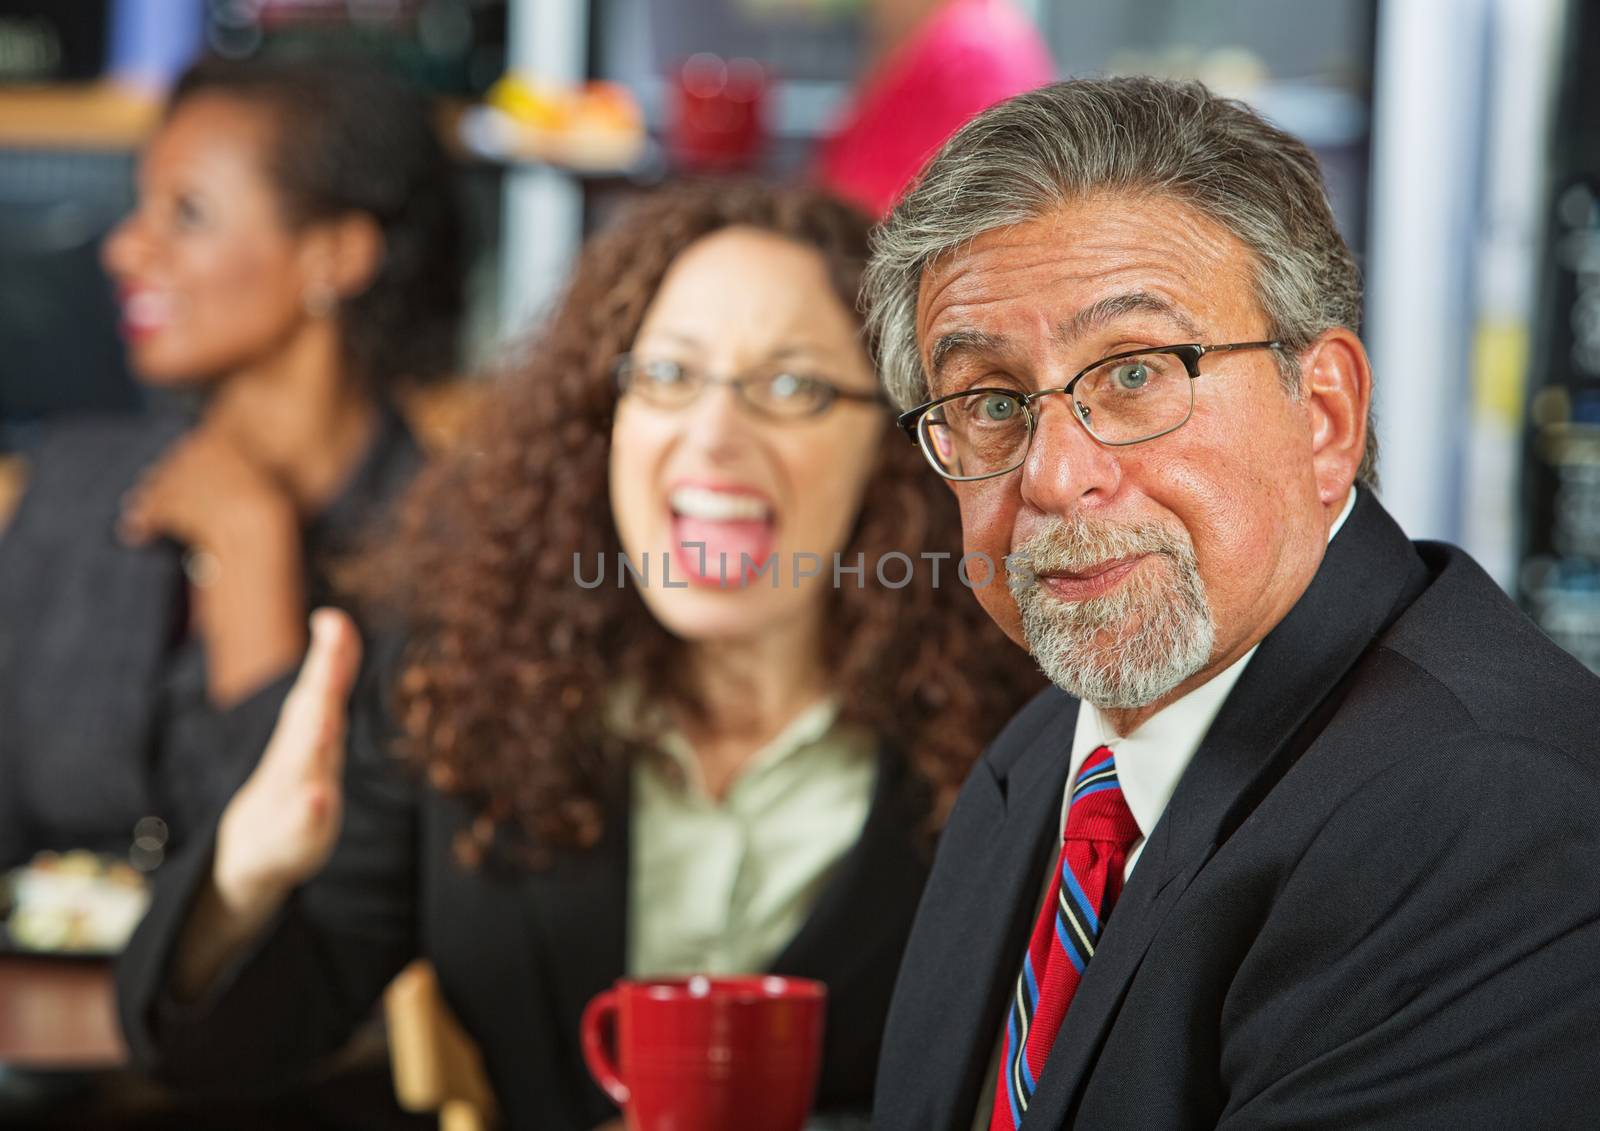 Frustrated businessman arguing with woman in cafeteria